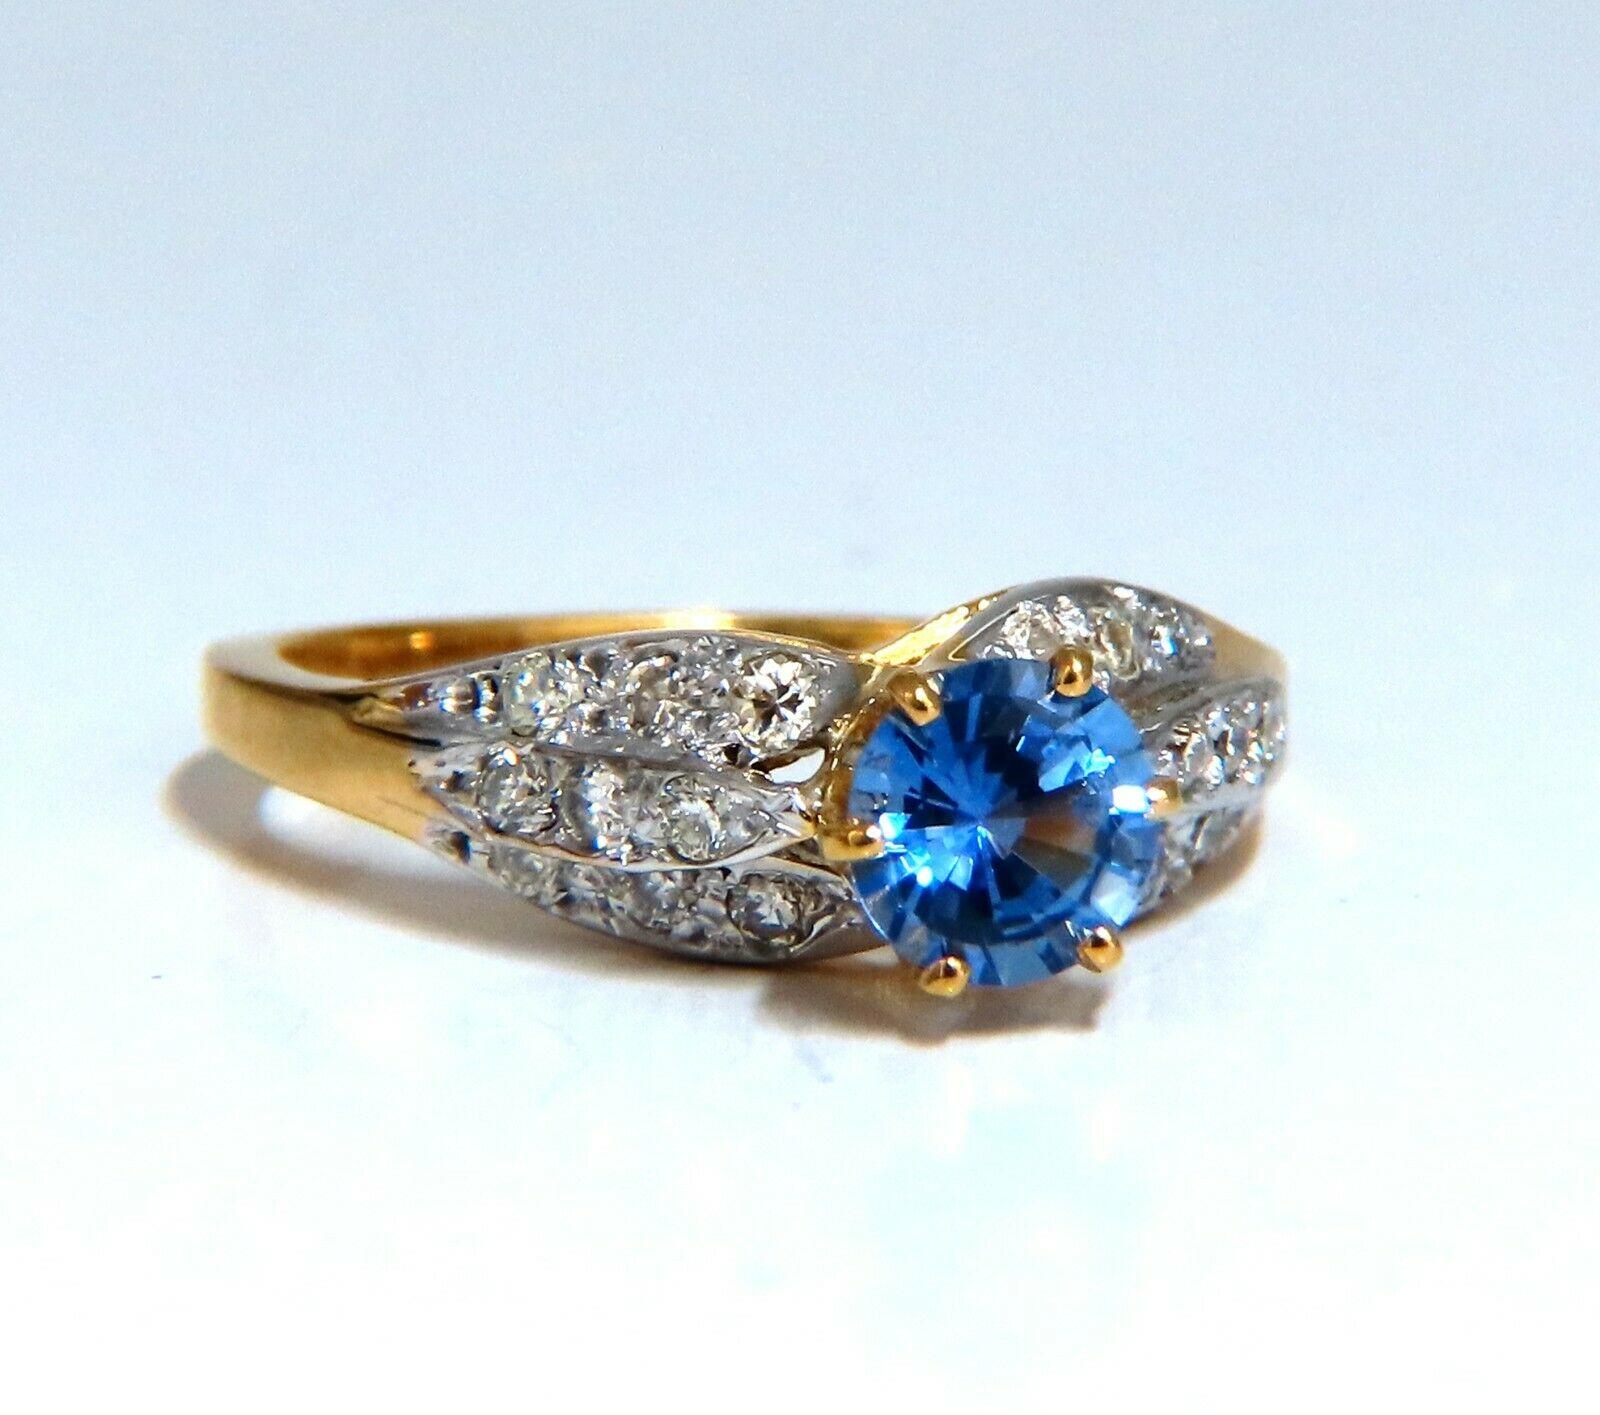 Raised solitaire Blue.

.75ct Natural Round cut sapphire ring.

Vivid Royal Blue

Clean Clarity & Transparent.

5.6mm

.30ct Natural Side round diamonds.

H-color Vs-2 clarity.

14kt. yellow gold

3.7 grams

Ring Current size: 5.5

depth of ring: